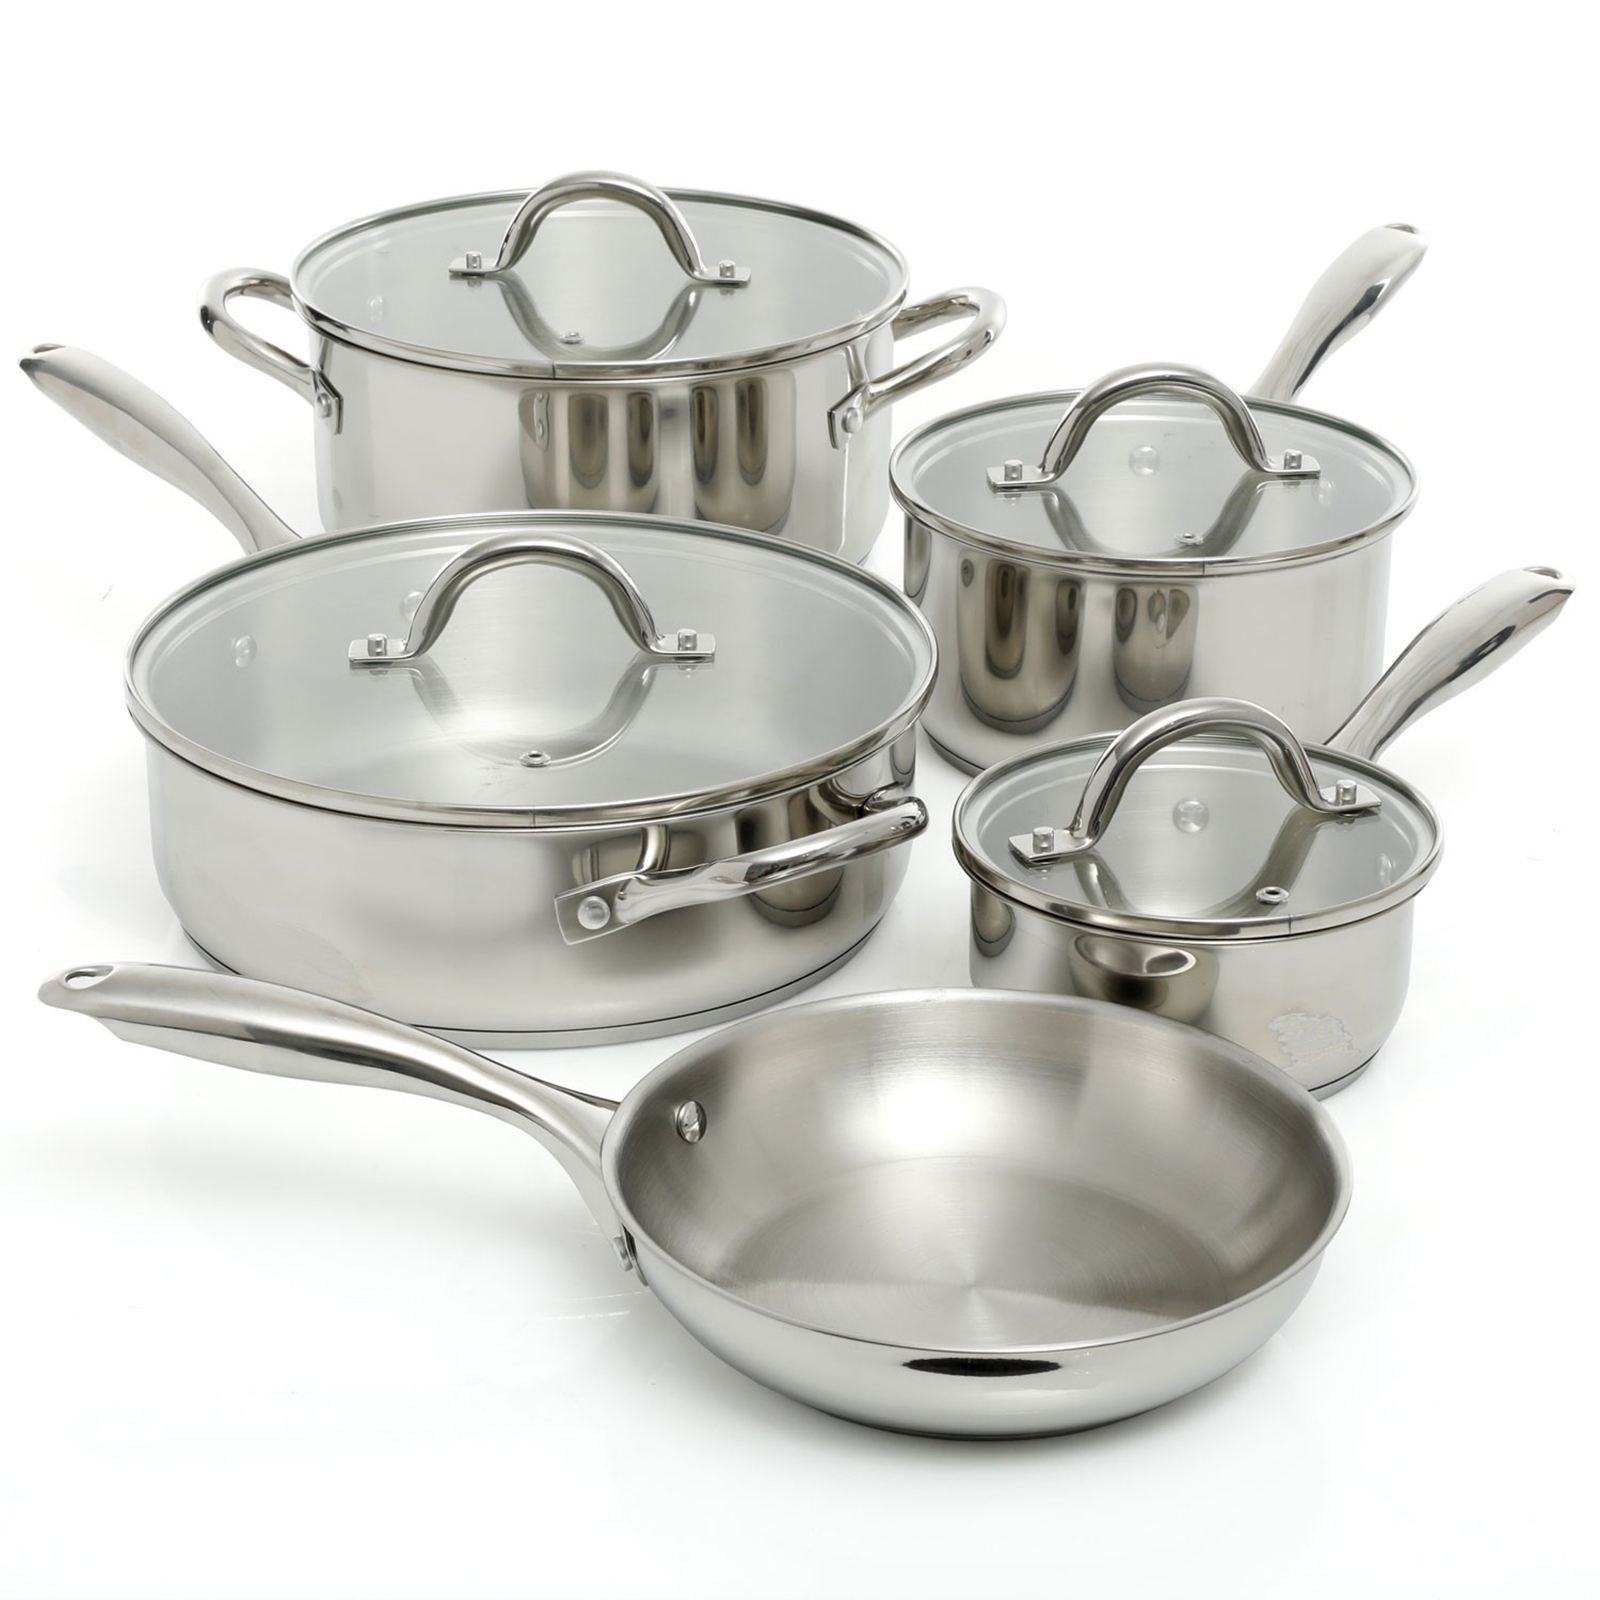 Oster Saunders 9 Piece Cookware Set in Silver Mirror Polish